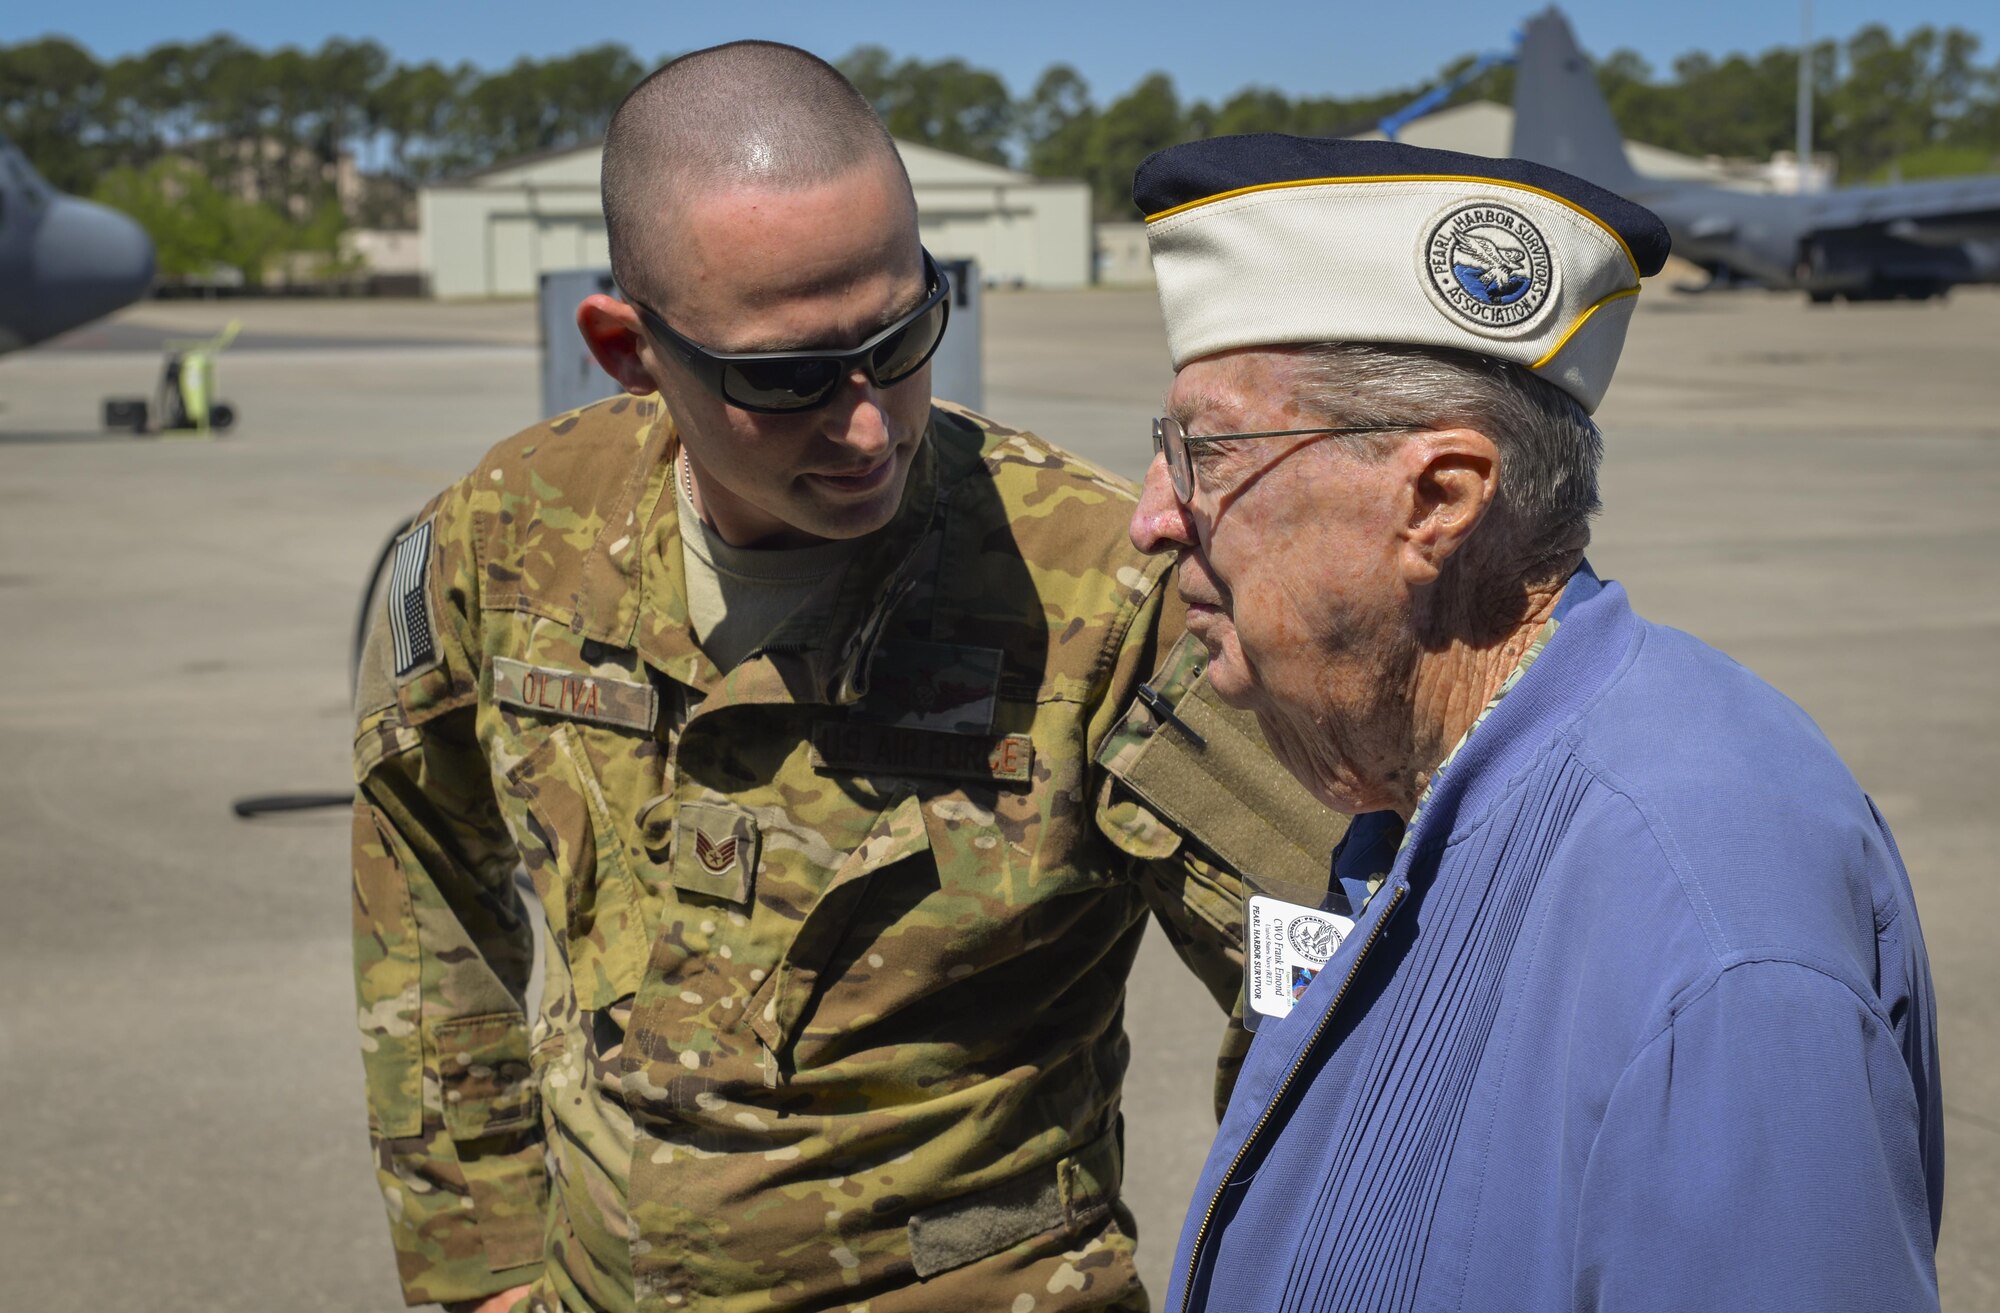 U.S. Air Force Staff Sgt. Anthony Oliva, a special missions aviator sensor operator with the 4th Special Operations Squadron, talks to retired U.S. Navy Chief Warrant Officer 4 Francis Edmond, a Pearl Harbor survivor, at Hurlburt Field, Fla., April 5, 2016. During a base tour, Edmond and three fellow Pearl Harbor survivors spent time with Air Commandos to discuss their experiences and the differences they see in today’s force. (U.S. Air Force photo by 2nd Lt. Jaclyn Pienkowski)